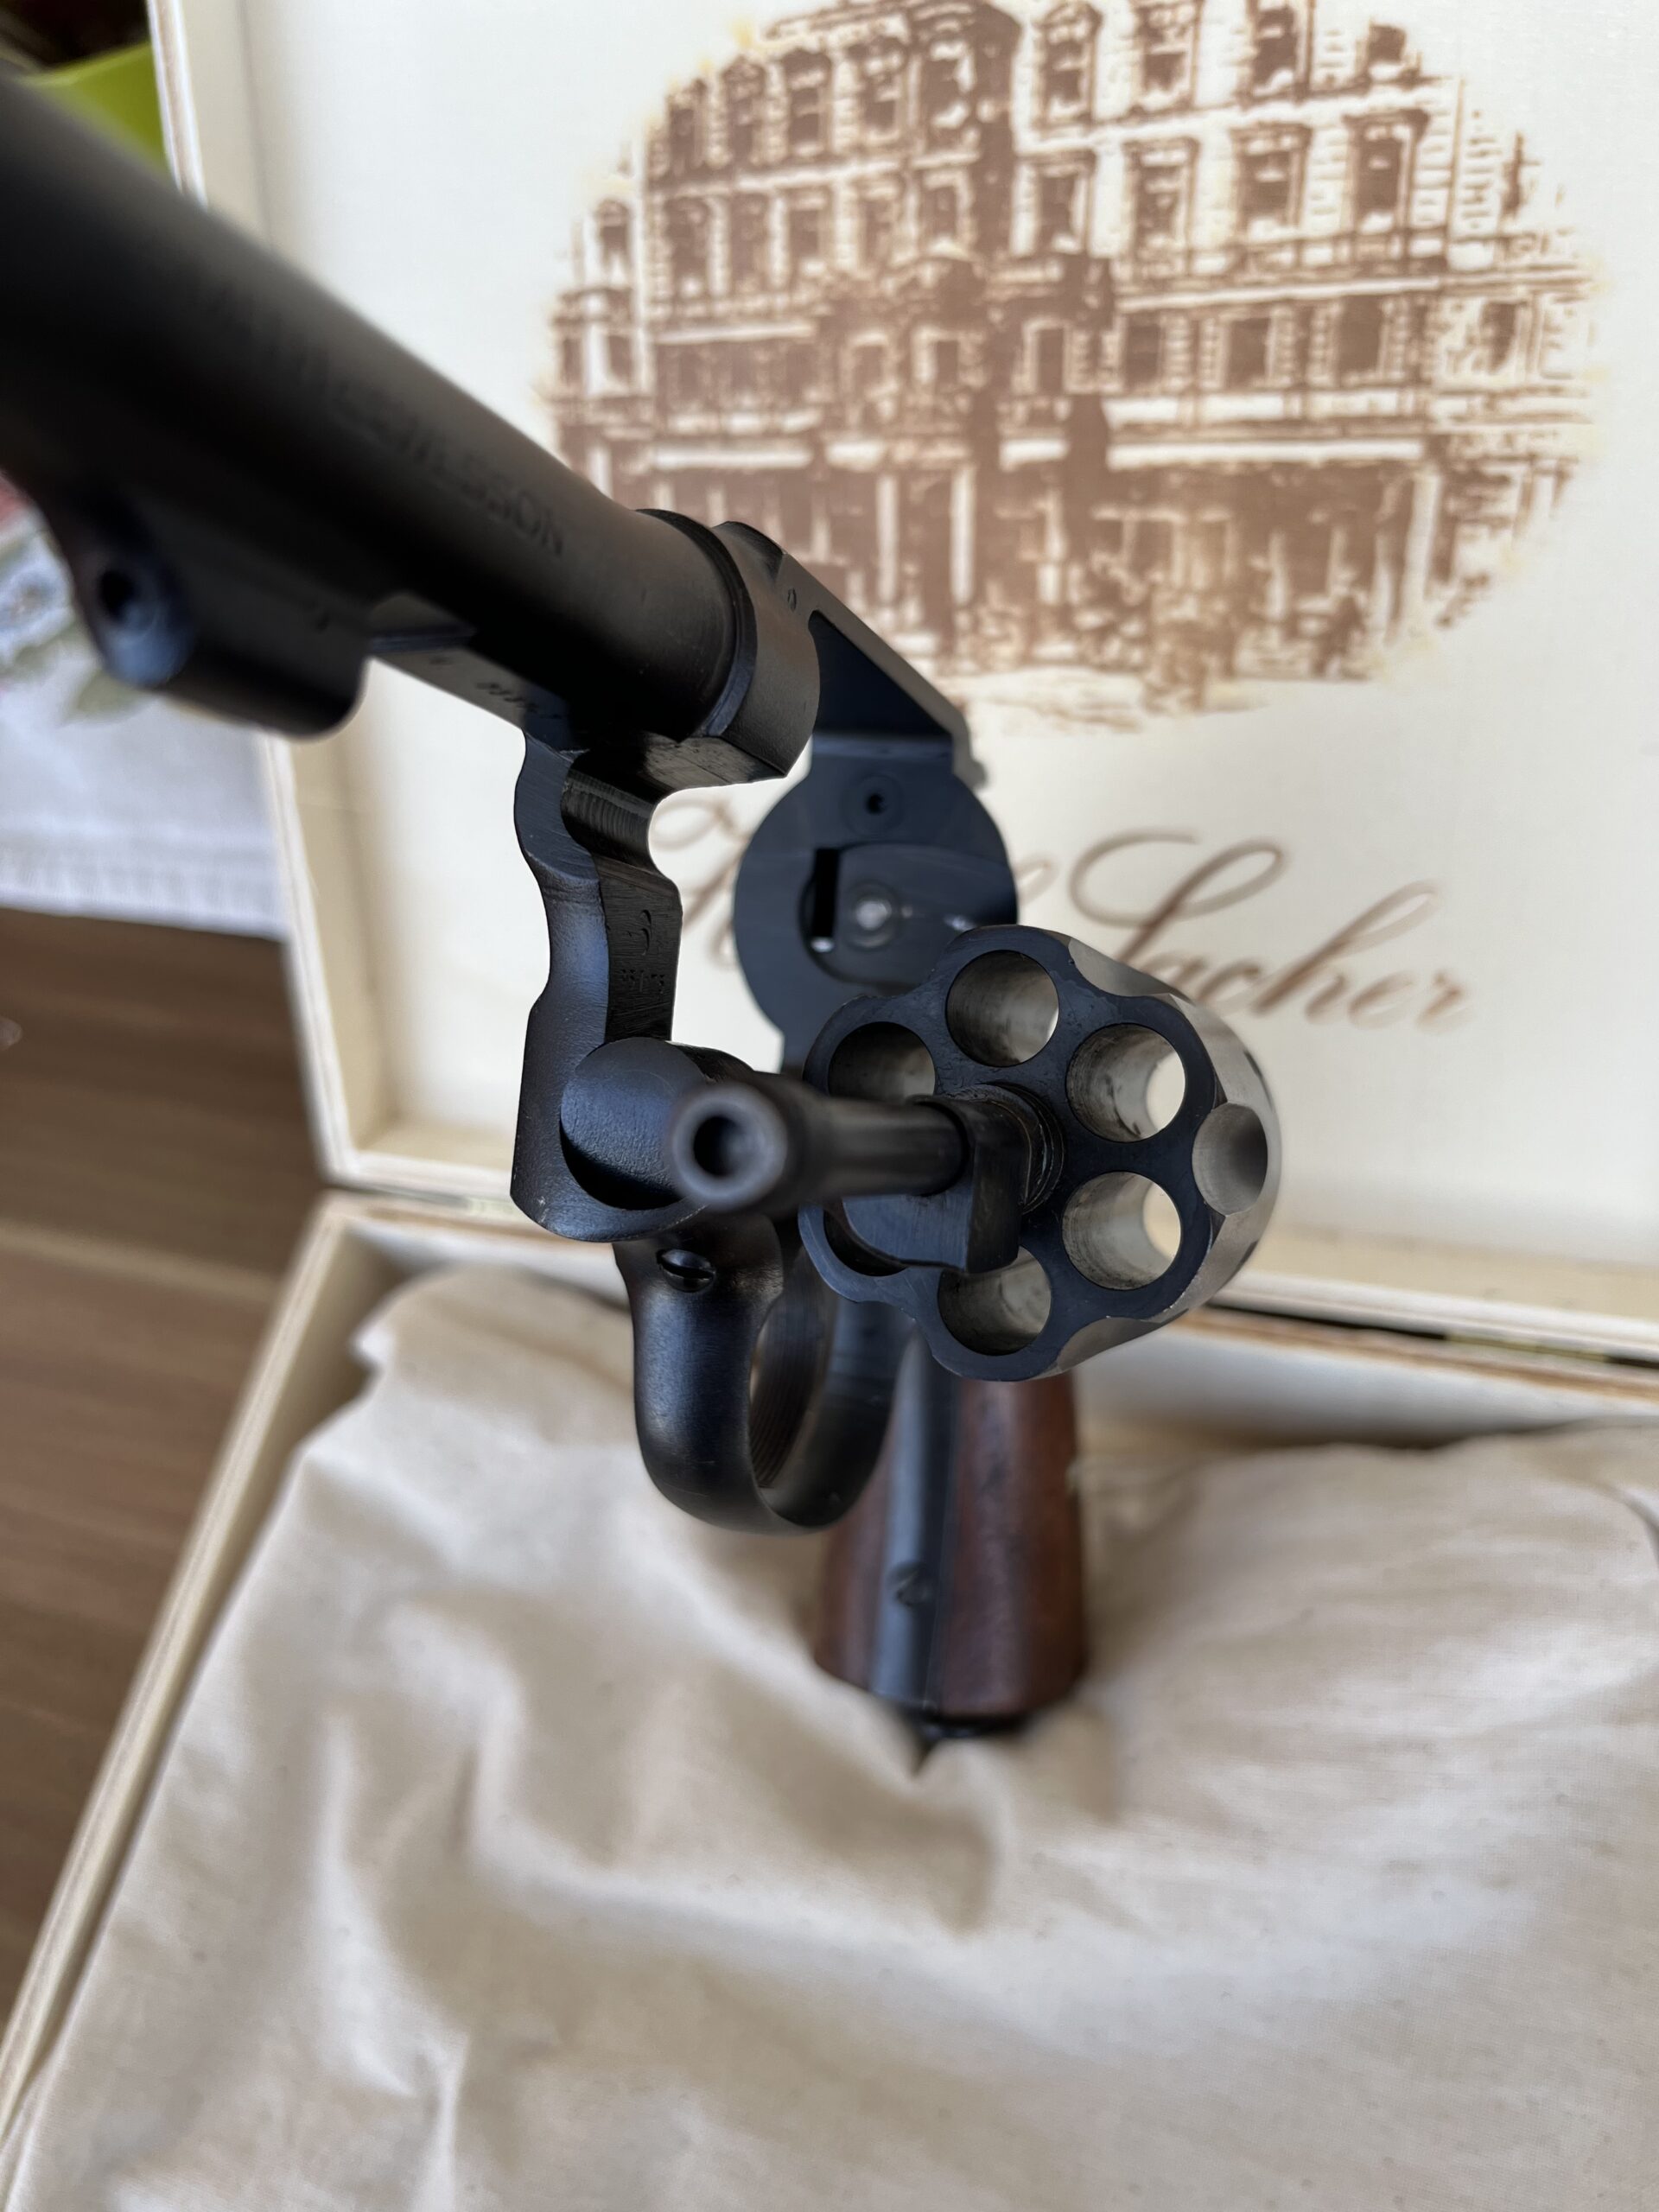 SMITH&WESSON MODEL 10 VICTORY 38 CAL.